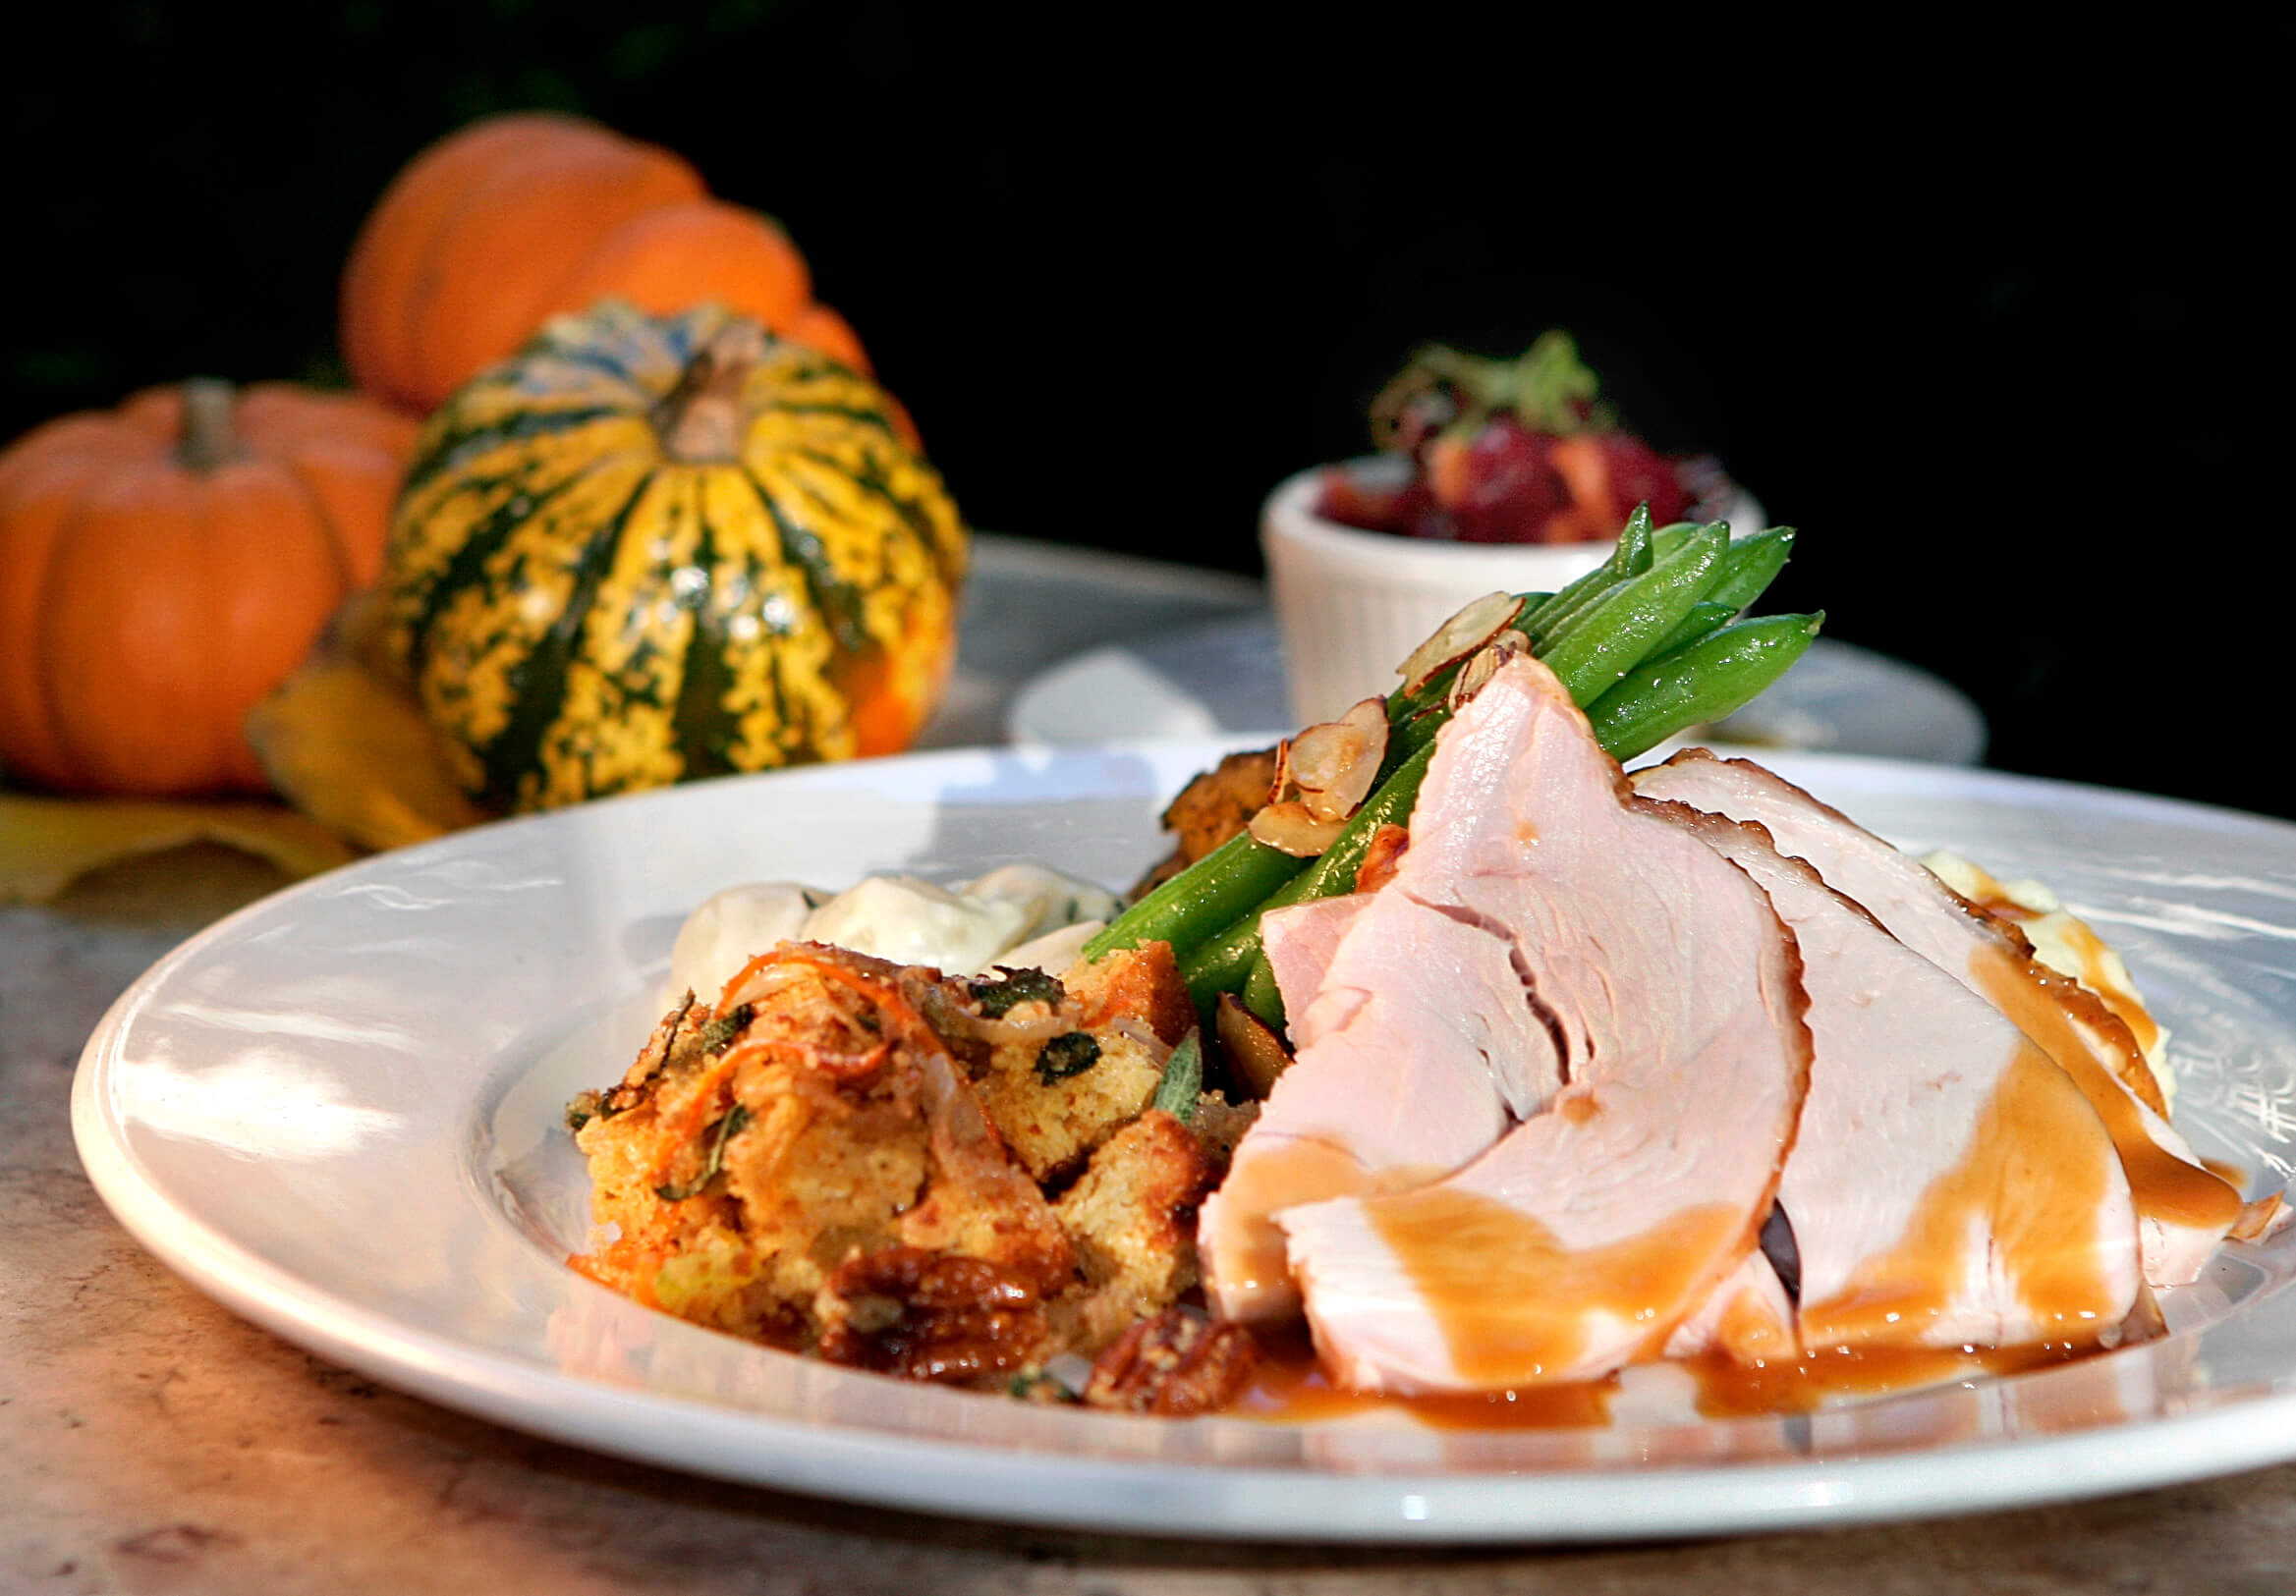 CAMBRIDGE, MA - NOVEMBER 2: Roasted turkey breast with cornbread and candied pecan stuffing, creamed onions, gratine of acorn squash, green beans alamadine and cranberry chutney is served during Thanksgiving at the Harvest in Cambridge, Wednesday, Nov. 2, 2005. (Photo by Wendy Maeda/The Boston Globe via Getty Images)